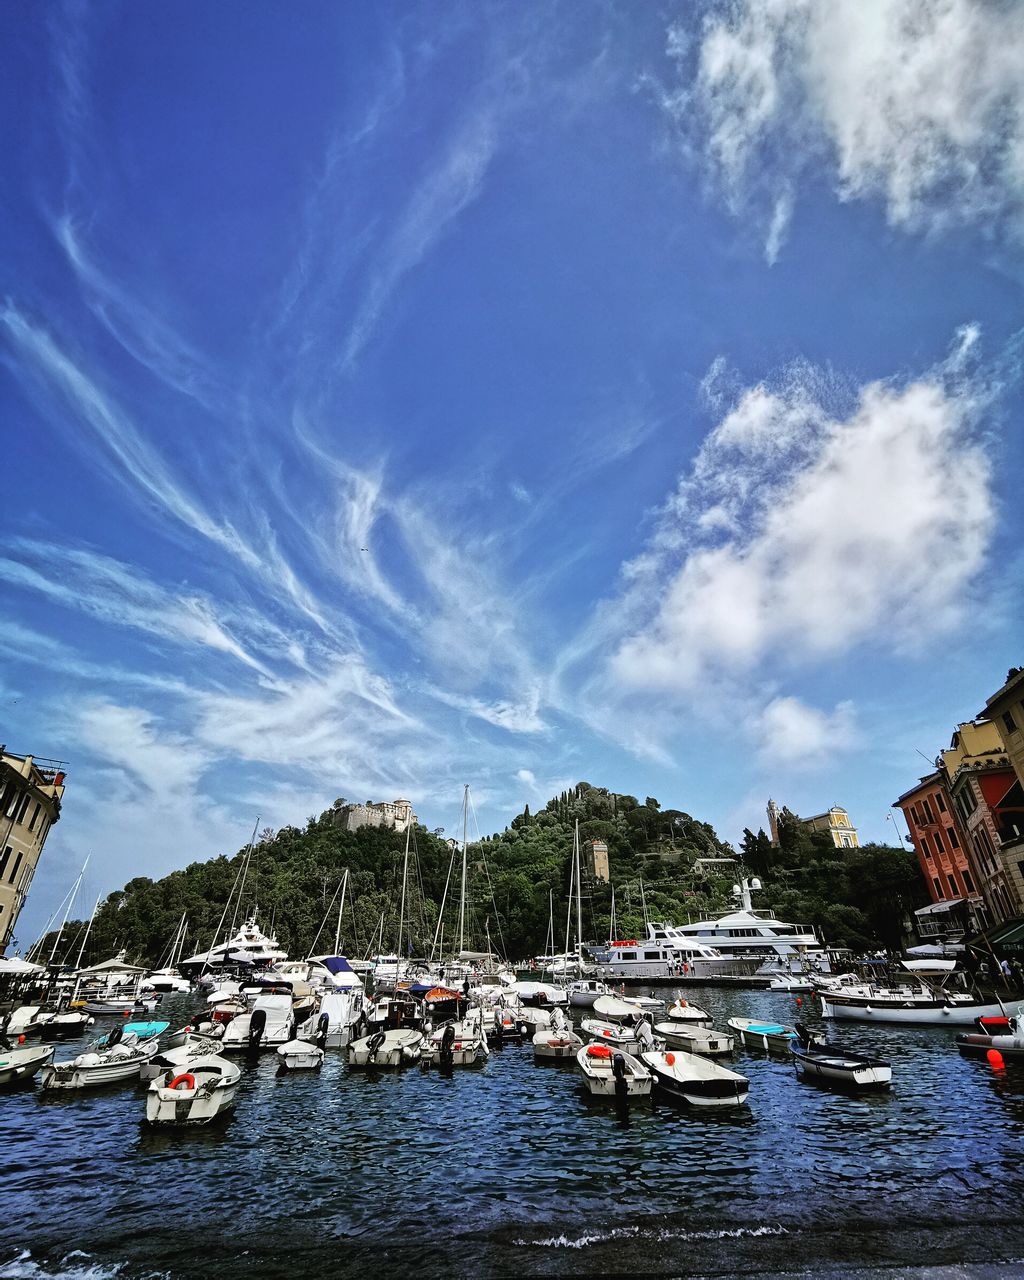 SAILBOATS MOORED IN HARBOR BY BUILDINGS AGAINST SKY